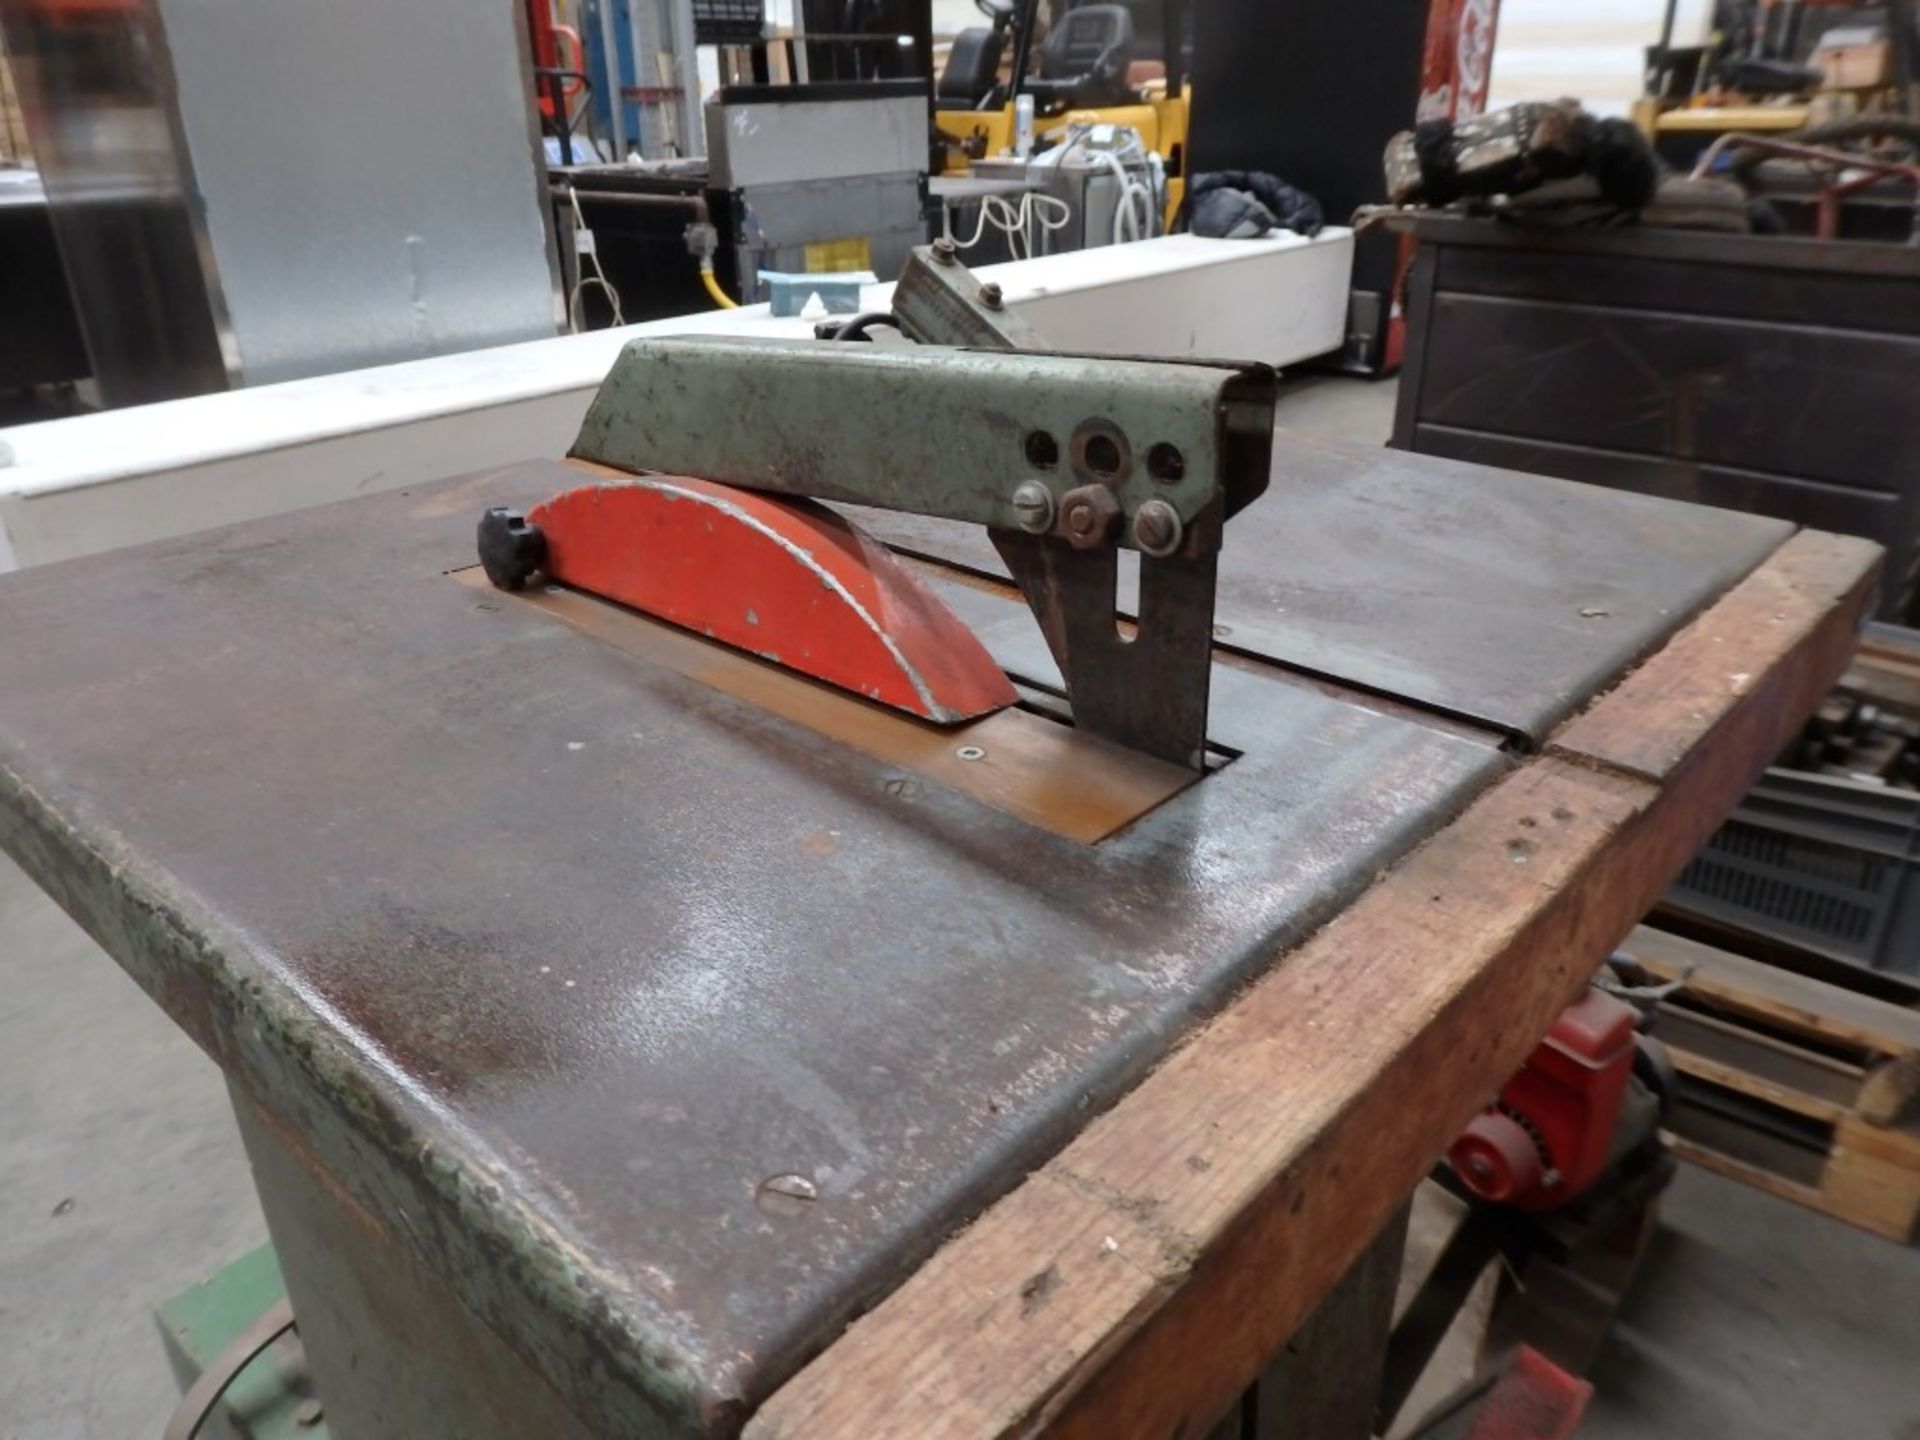 1 x Caber-Saw Circular Saw bench - Ref WPM113 - CL057 - Location: Welwyn, Hertfordshire, AL7Viewings - Image 8 of 8